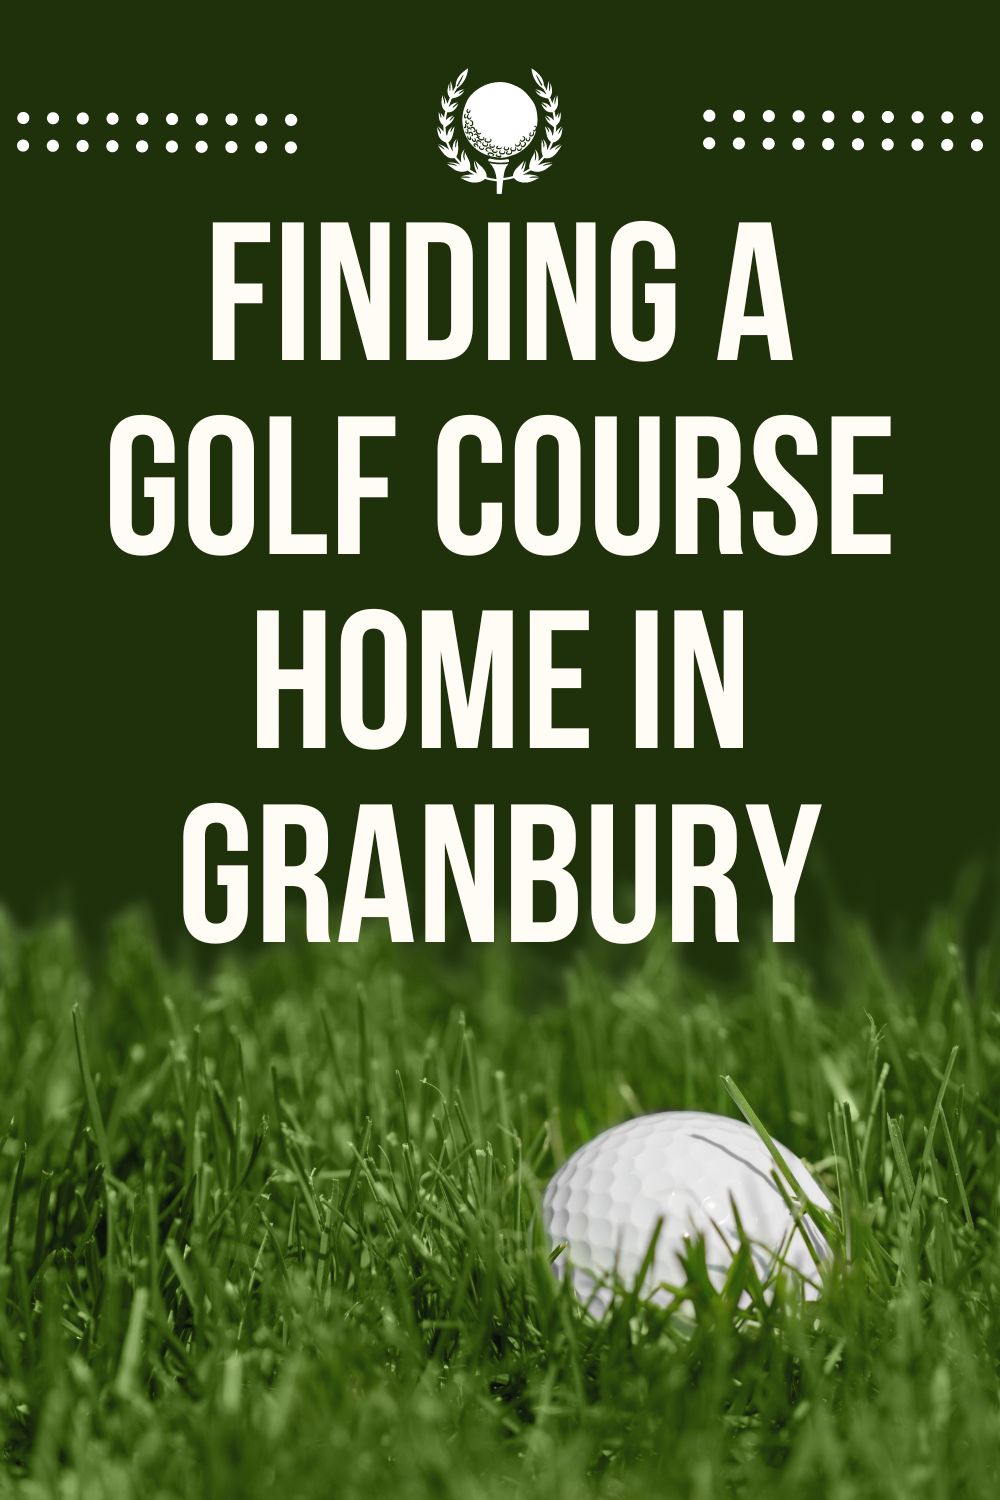 Finding a Golf Course Home in Granbury